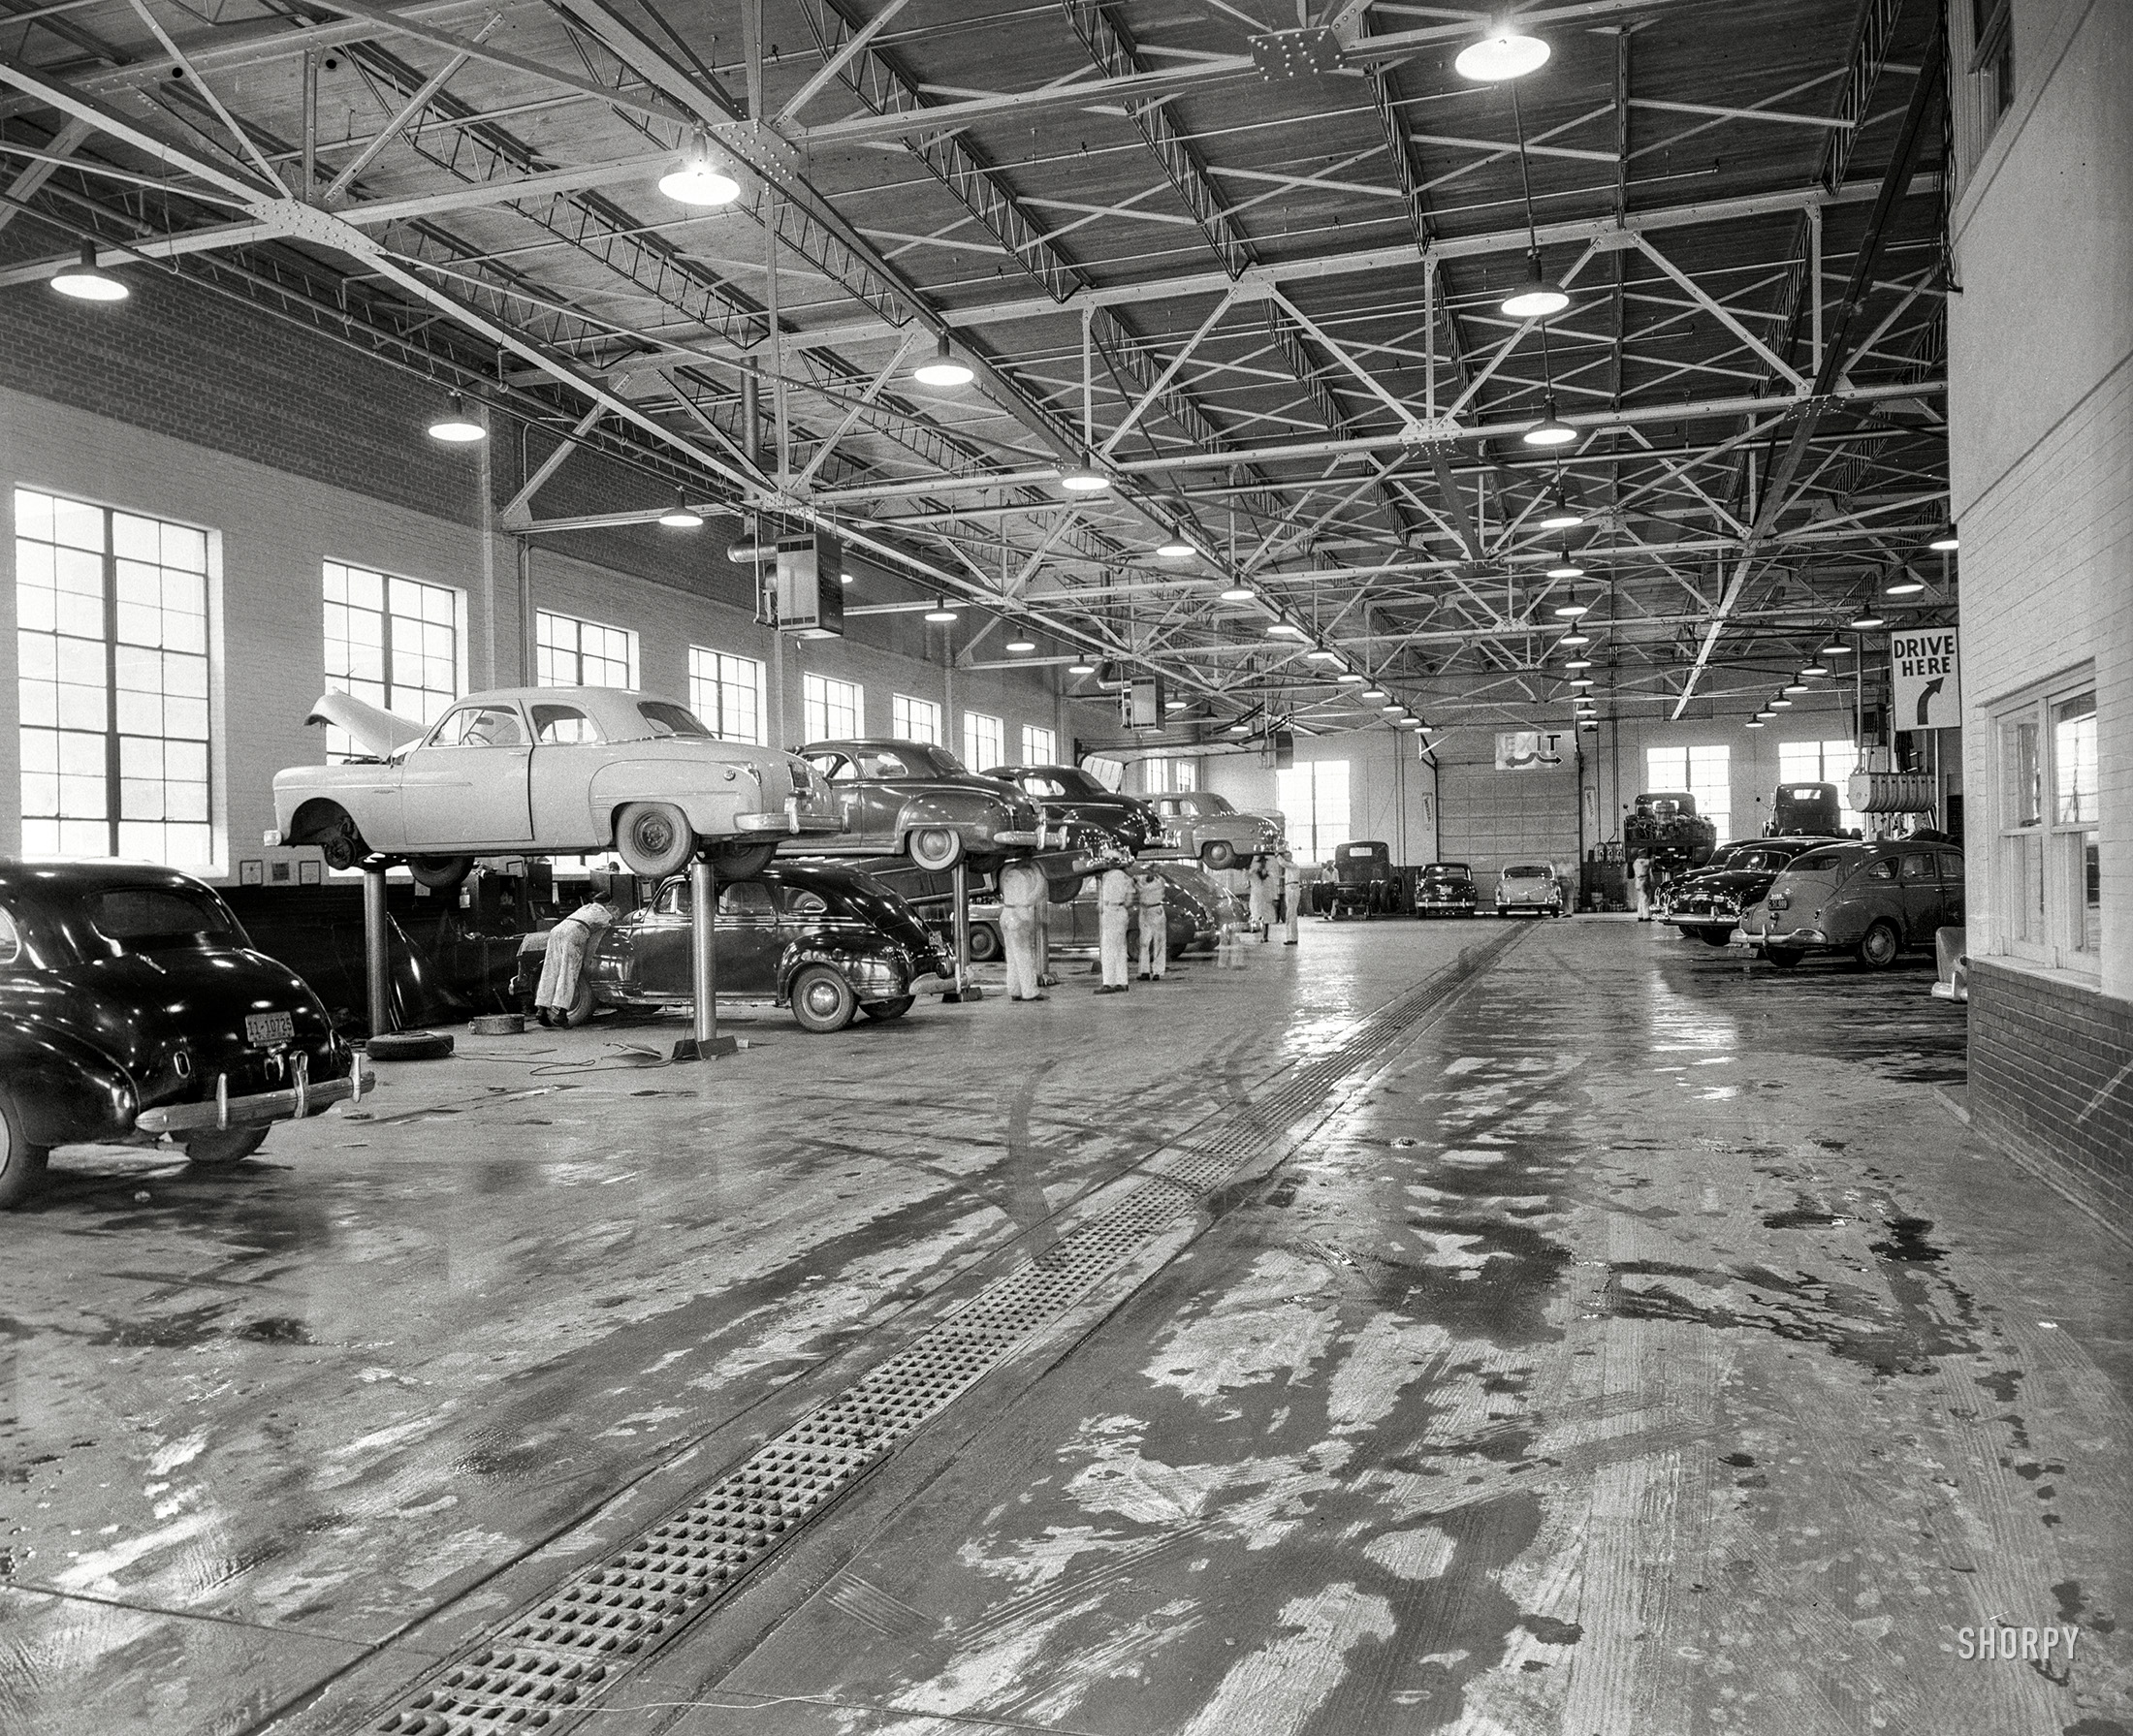 Columbus, Georgia. "John A. Pope Motor Co. garage, 1952." Service for your Mopar. 4x5 acetate negative from the News Archive. View full size.